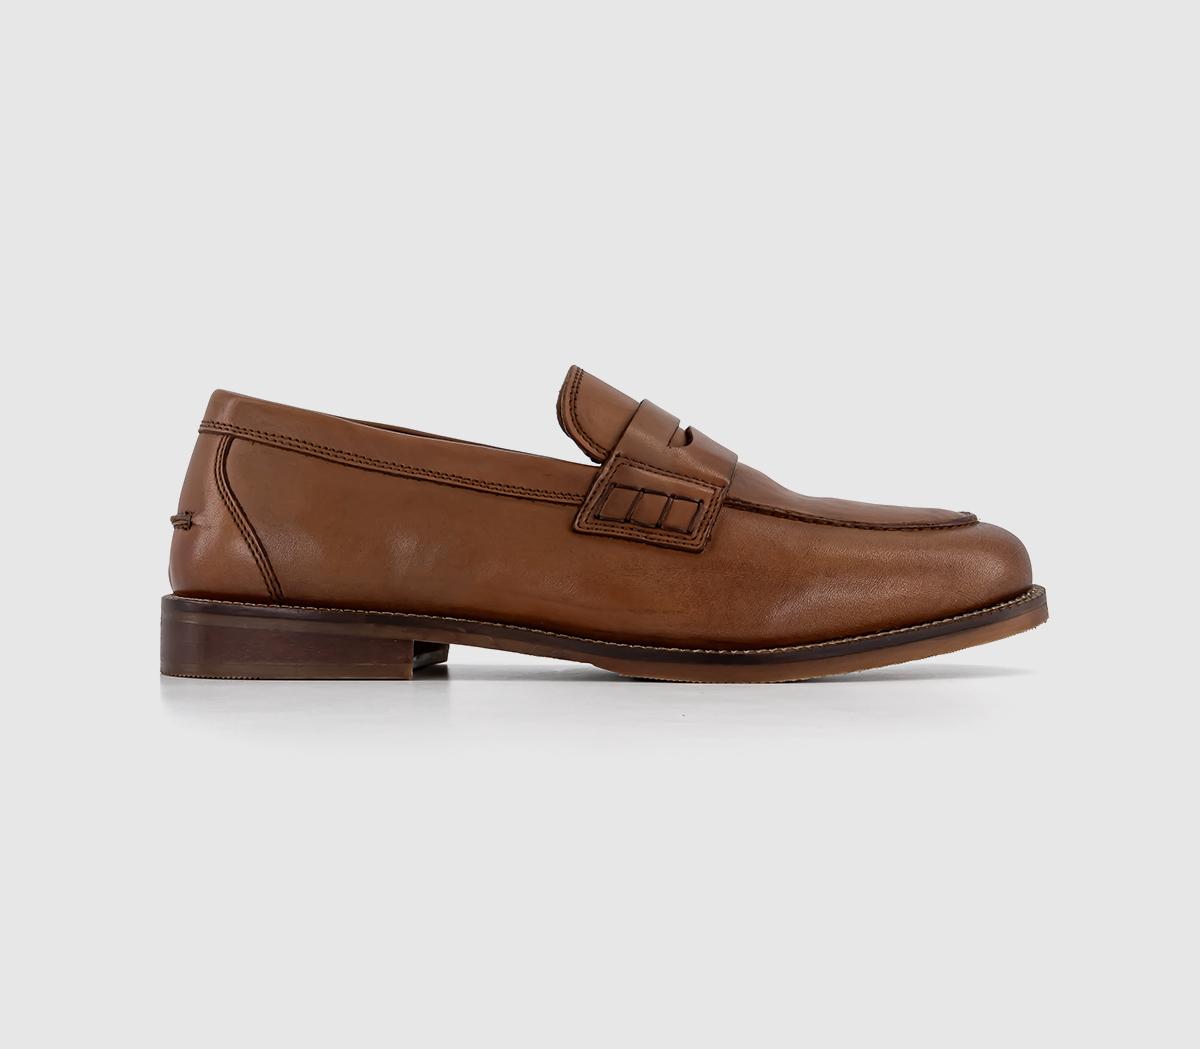 Marlborough Penny Loafers Tan Leather